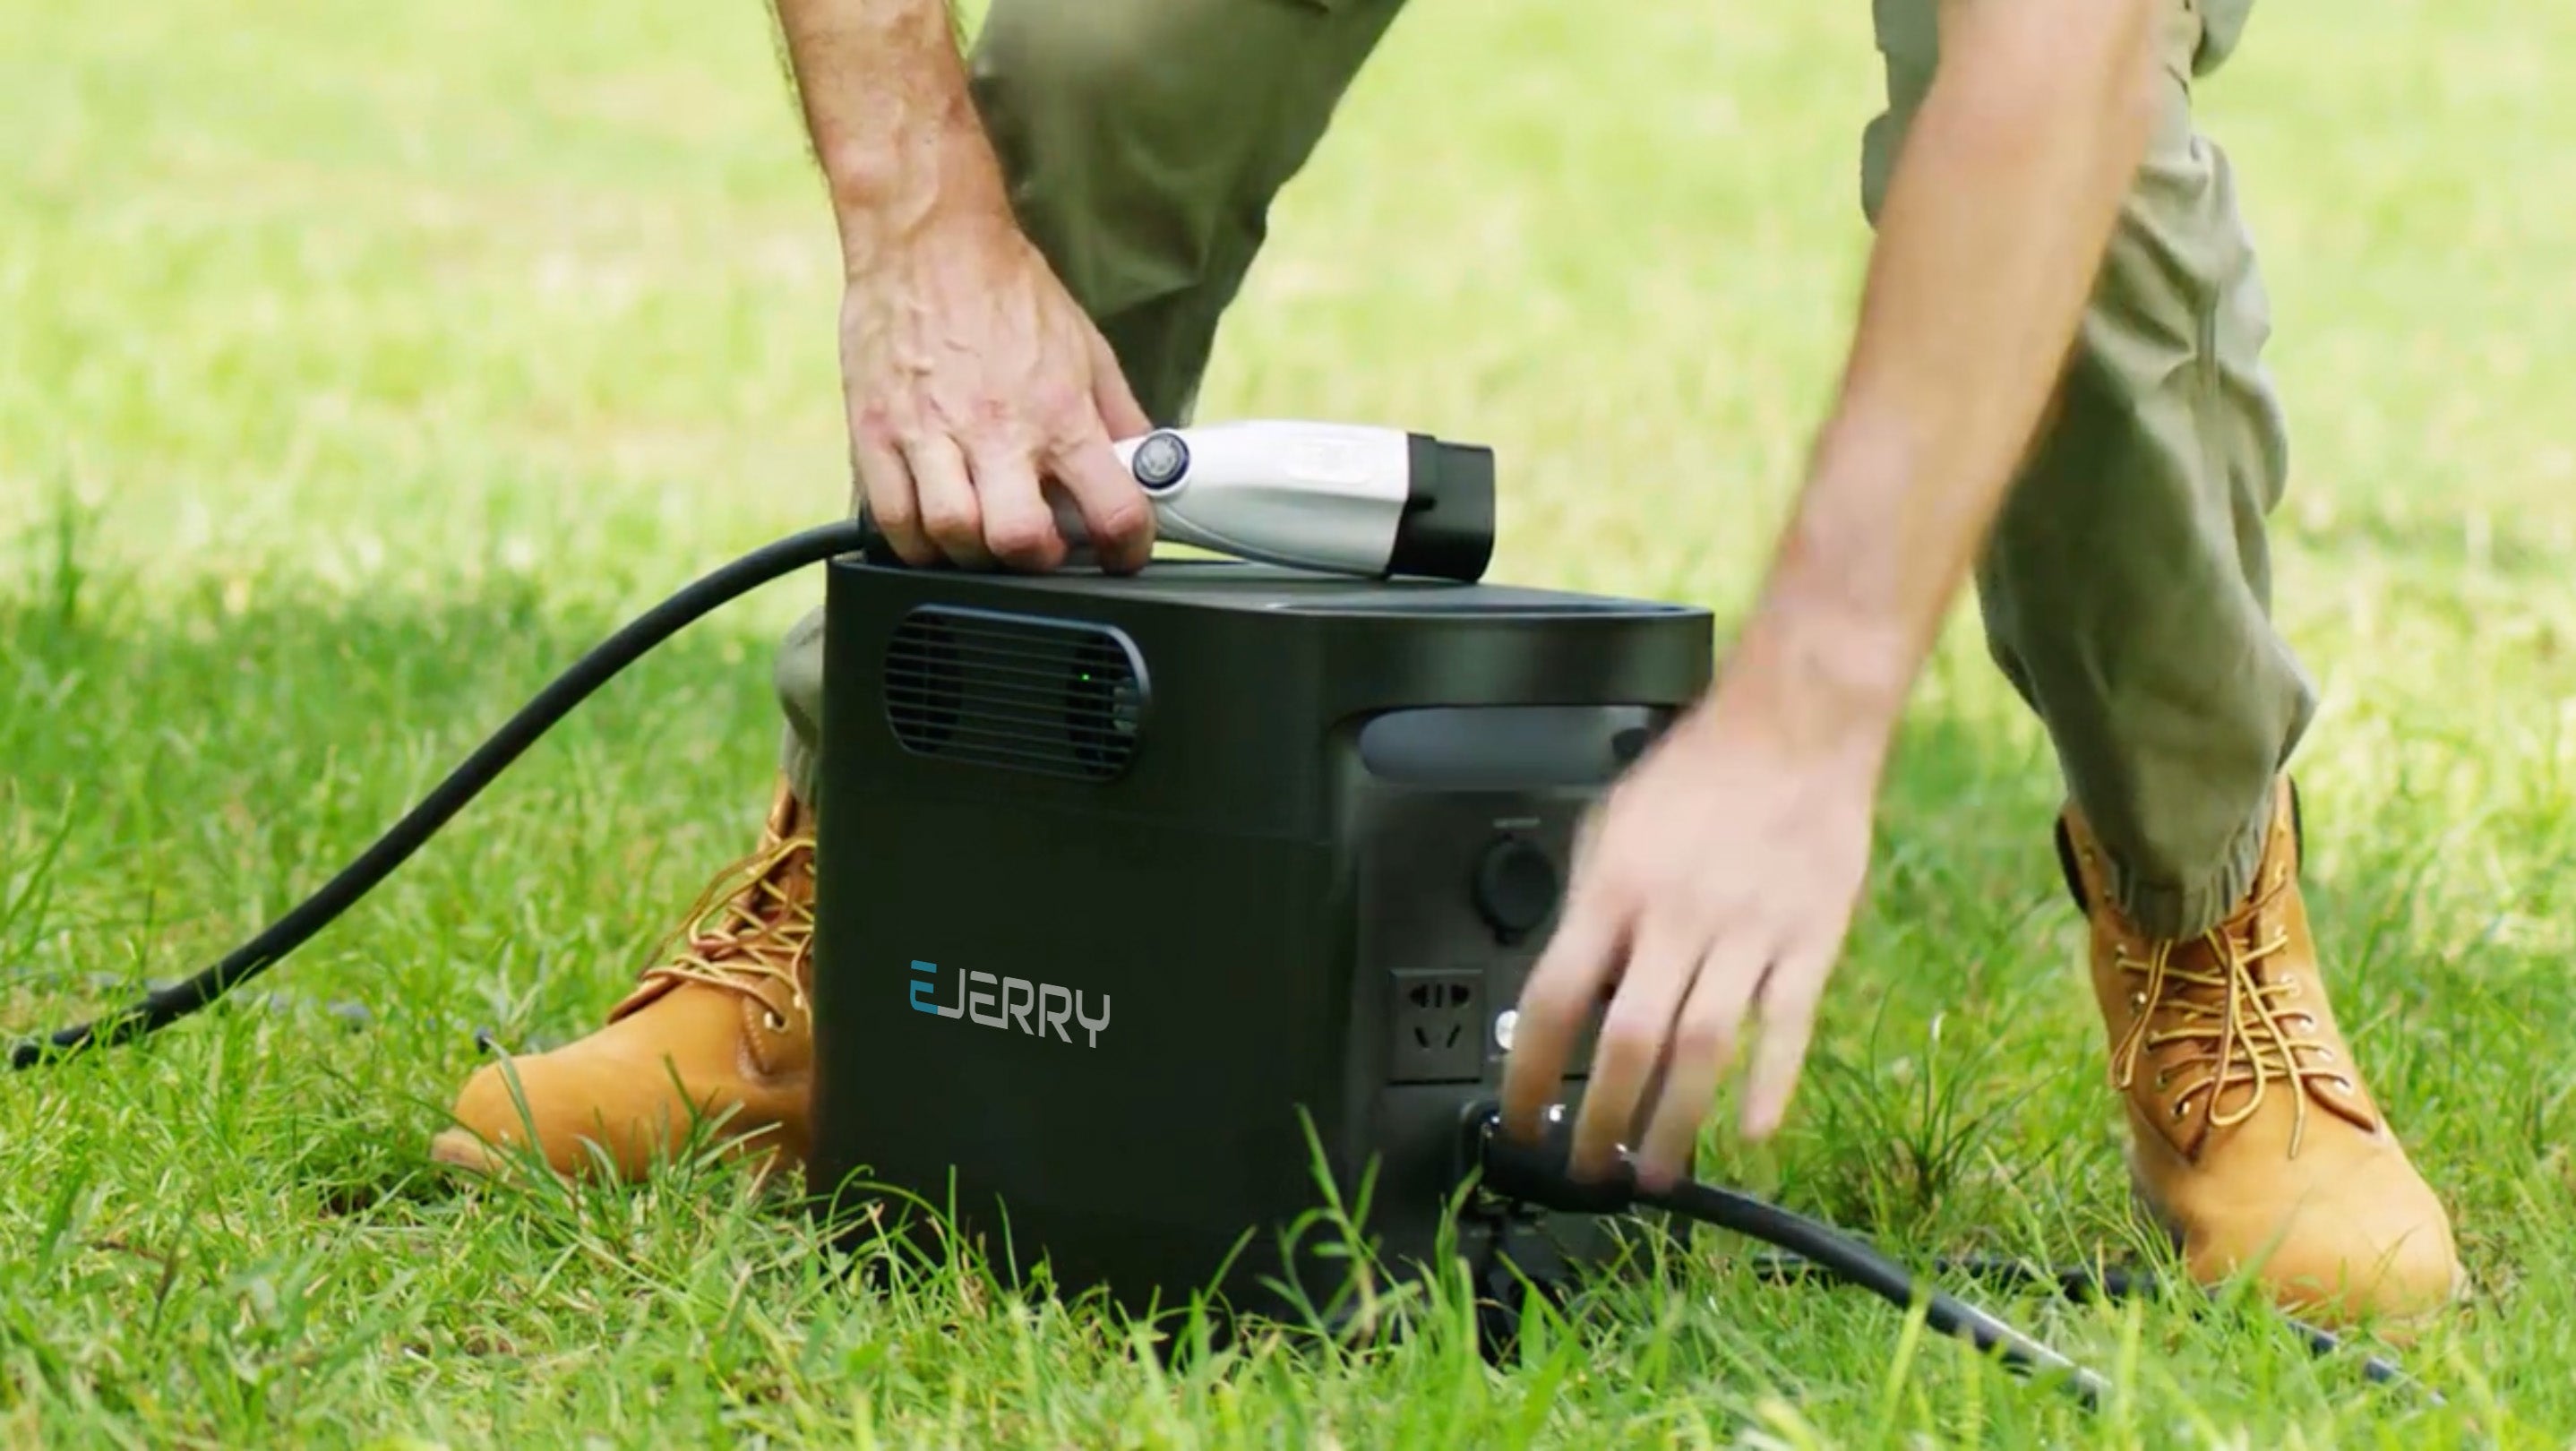 EJERRY - Portable EV Charger with Type 2 EV Charging Gun